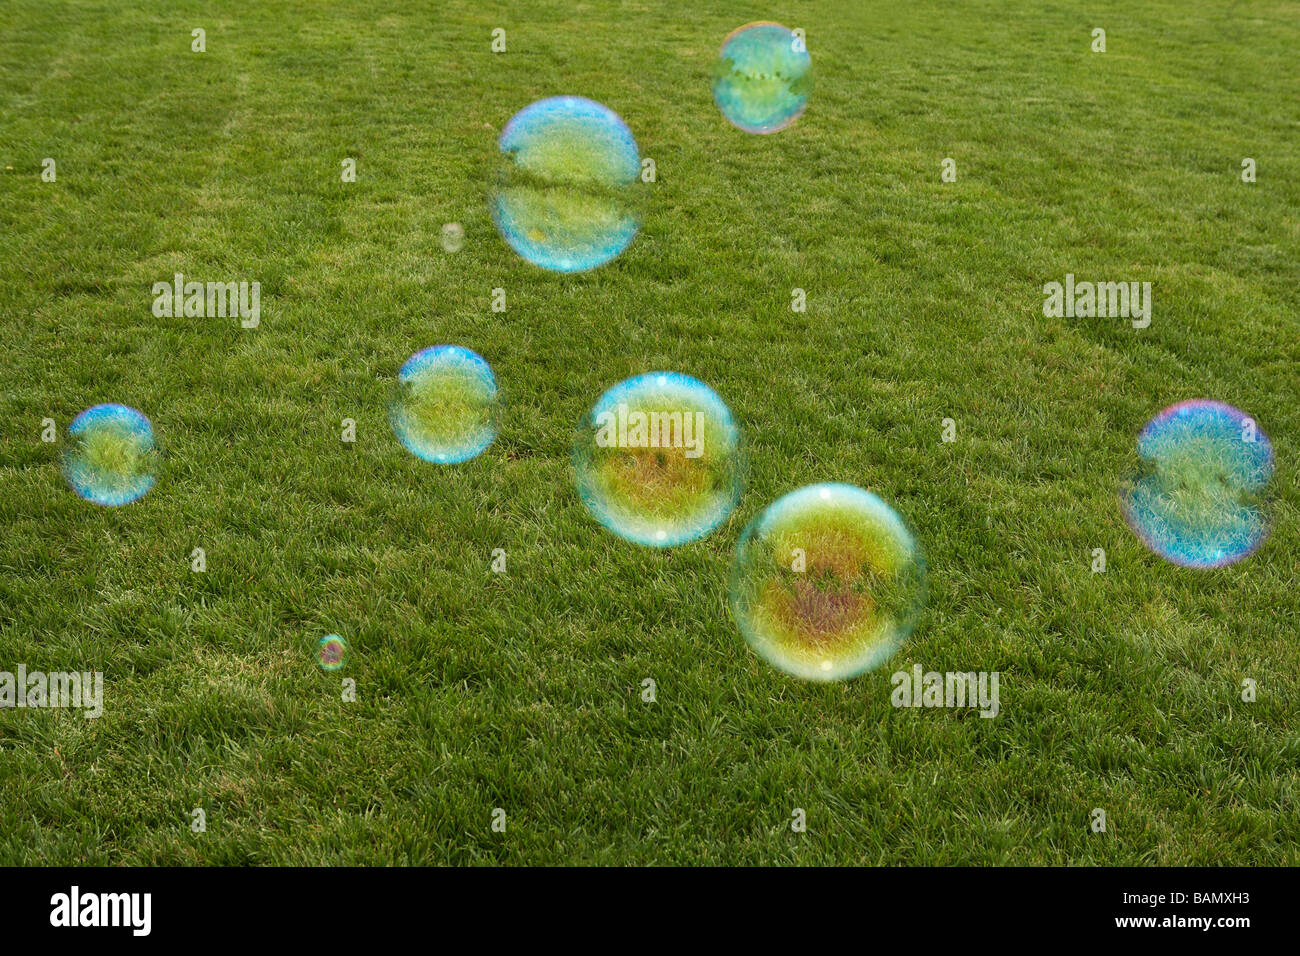 Young Girl Chasing Bubbles In Park Stock Photo